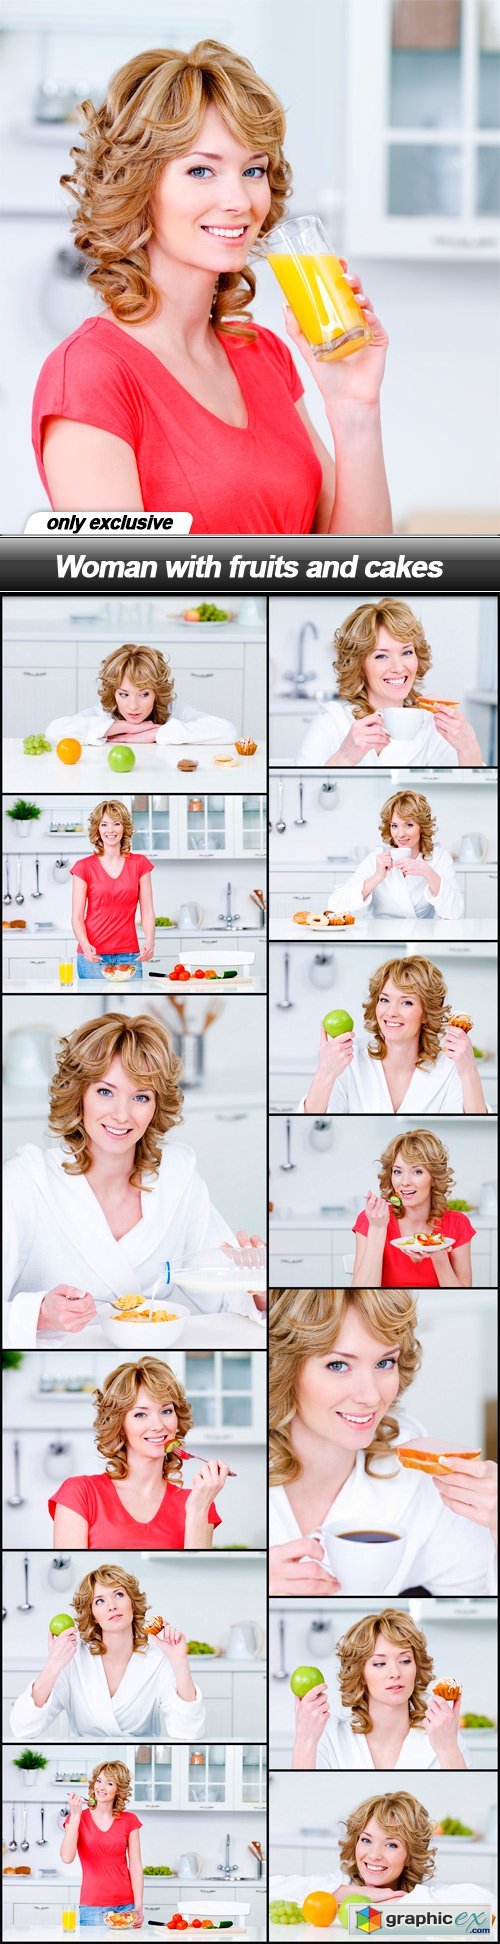 Woman with fruits and cakes - 14 UHQ JPEG